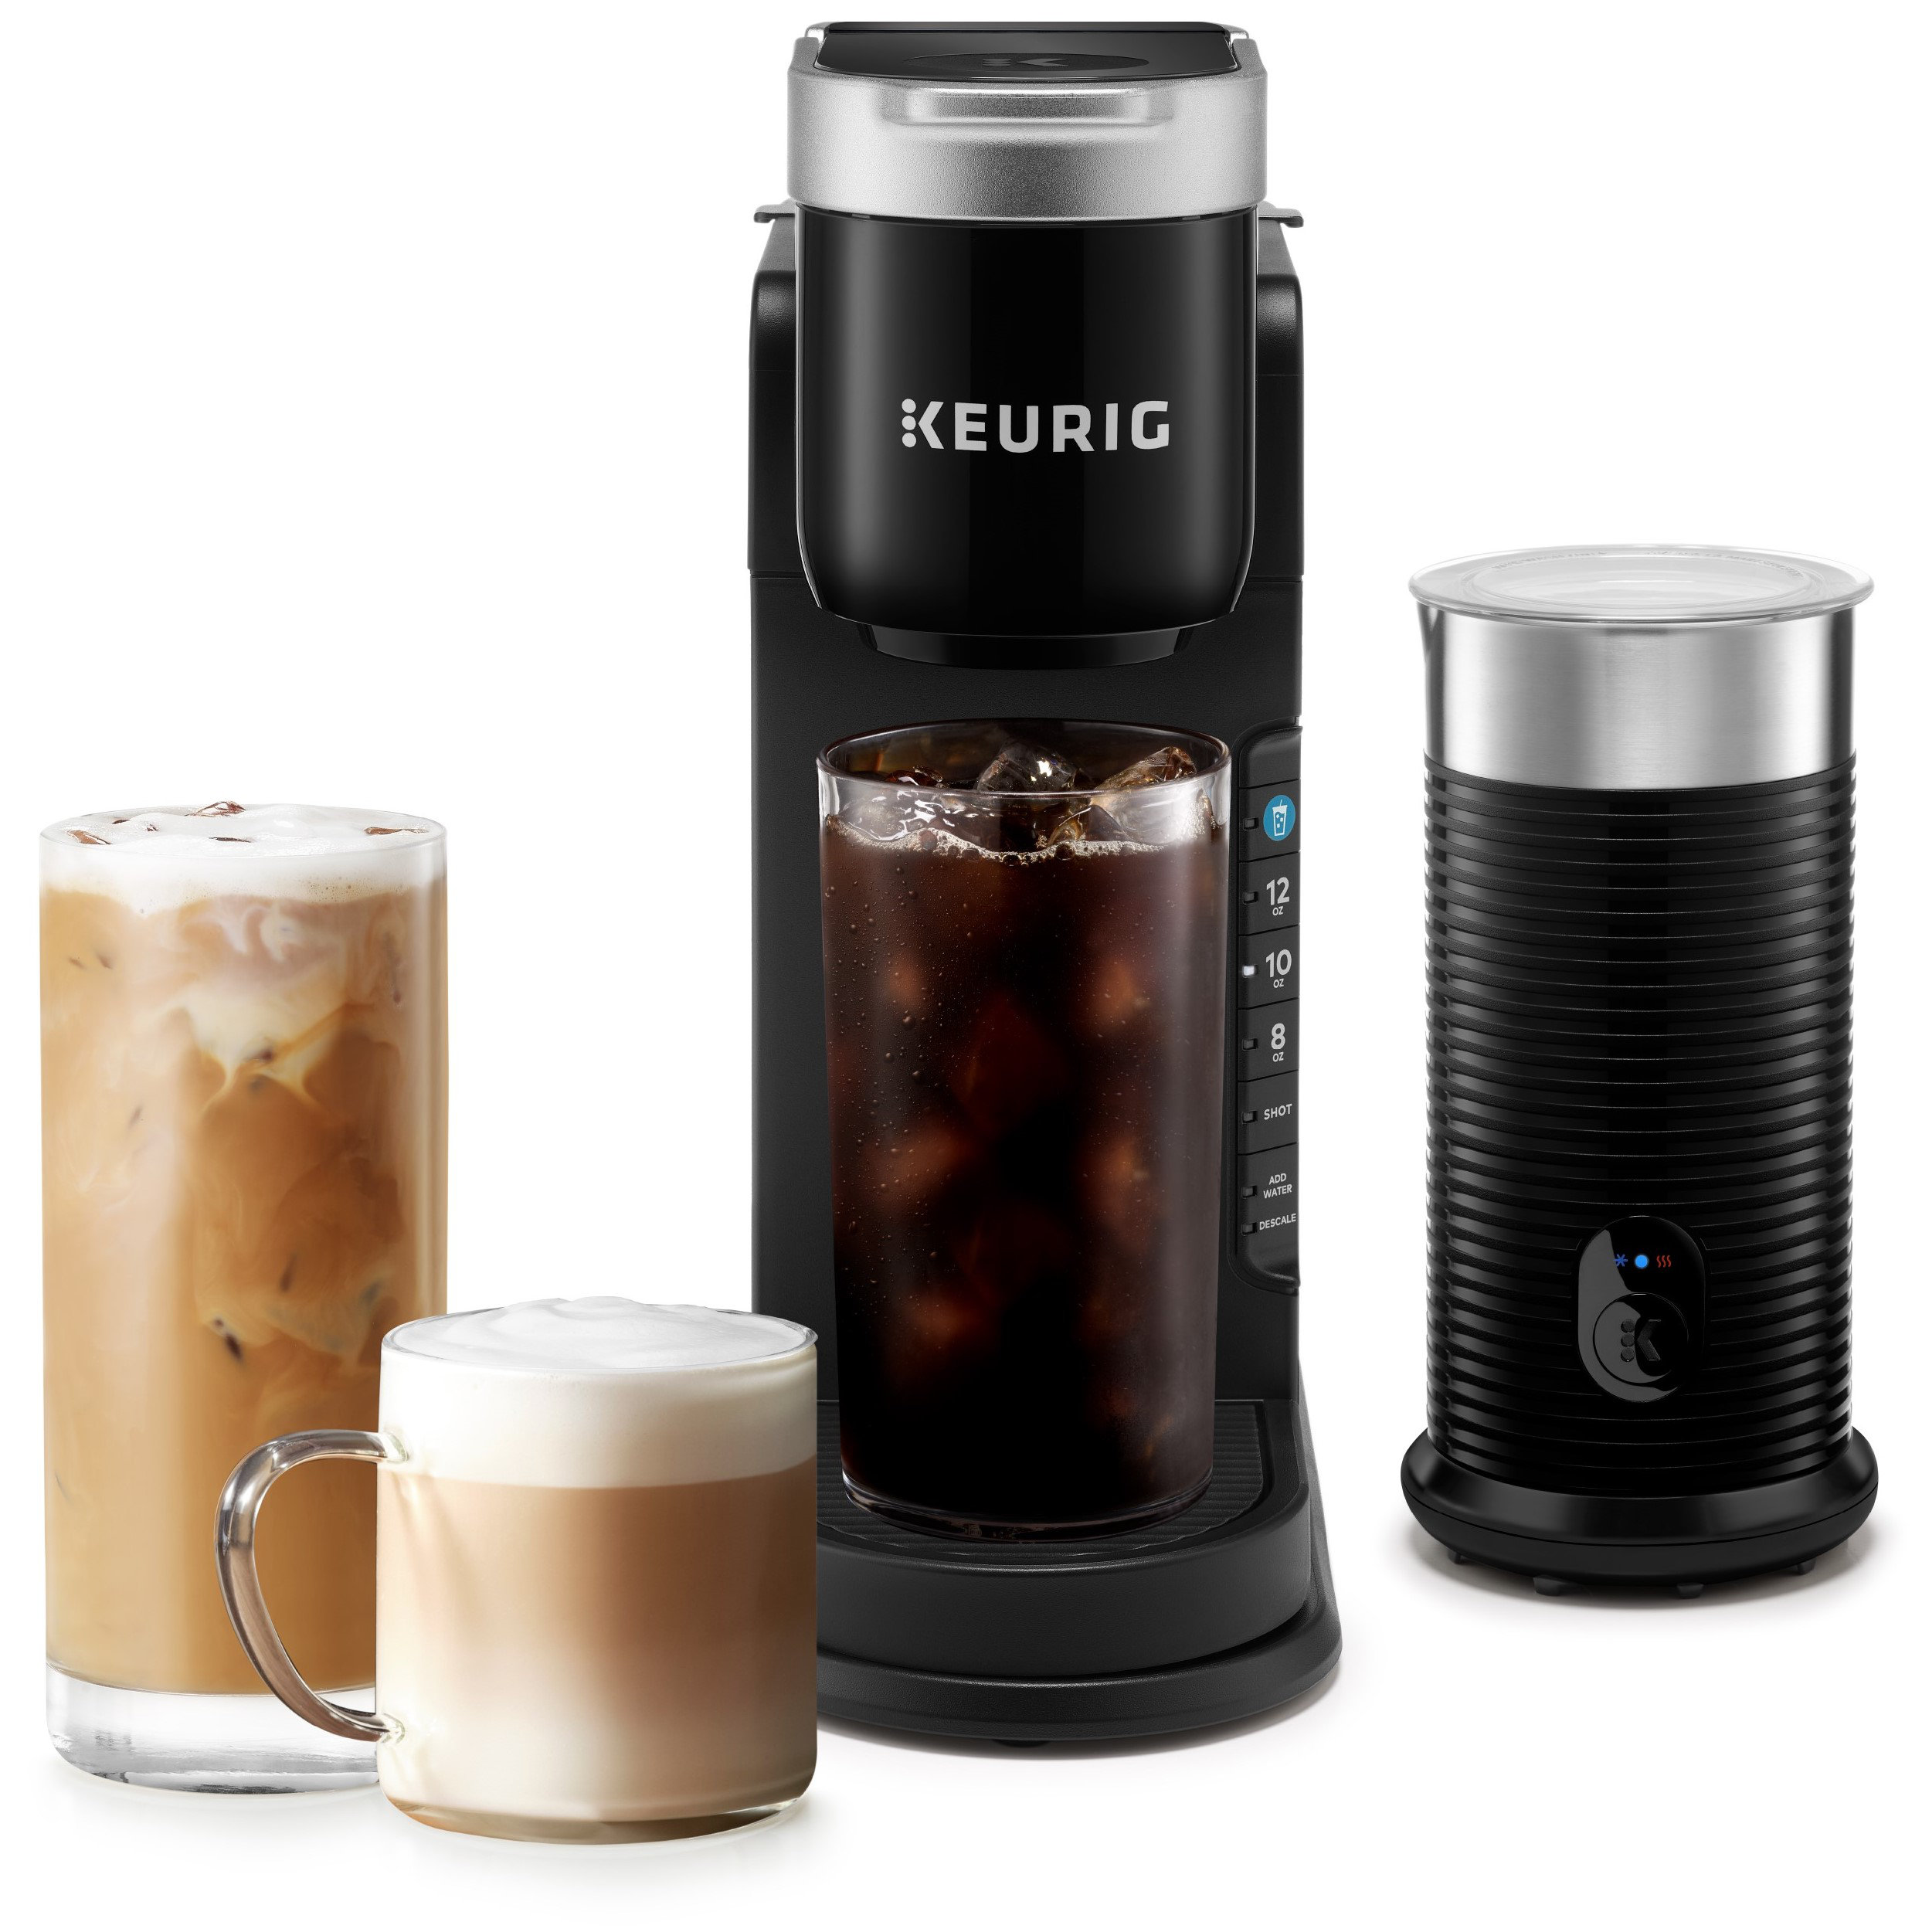 Keurig K-Cafe Special Edition Coffee Maker with Stainless Steel